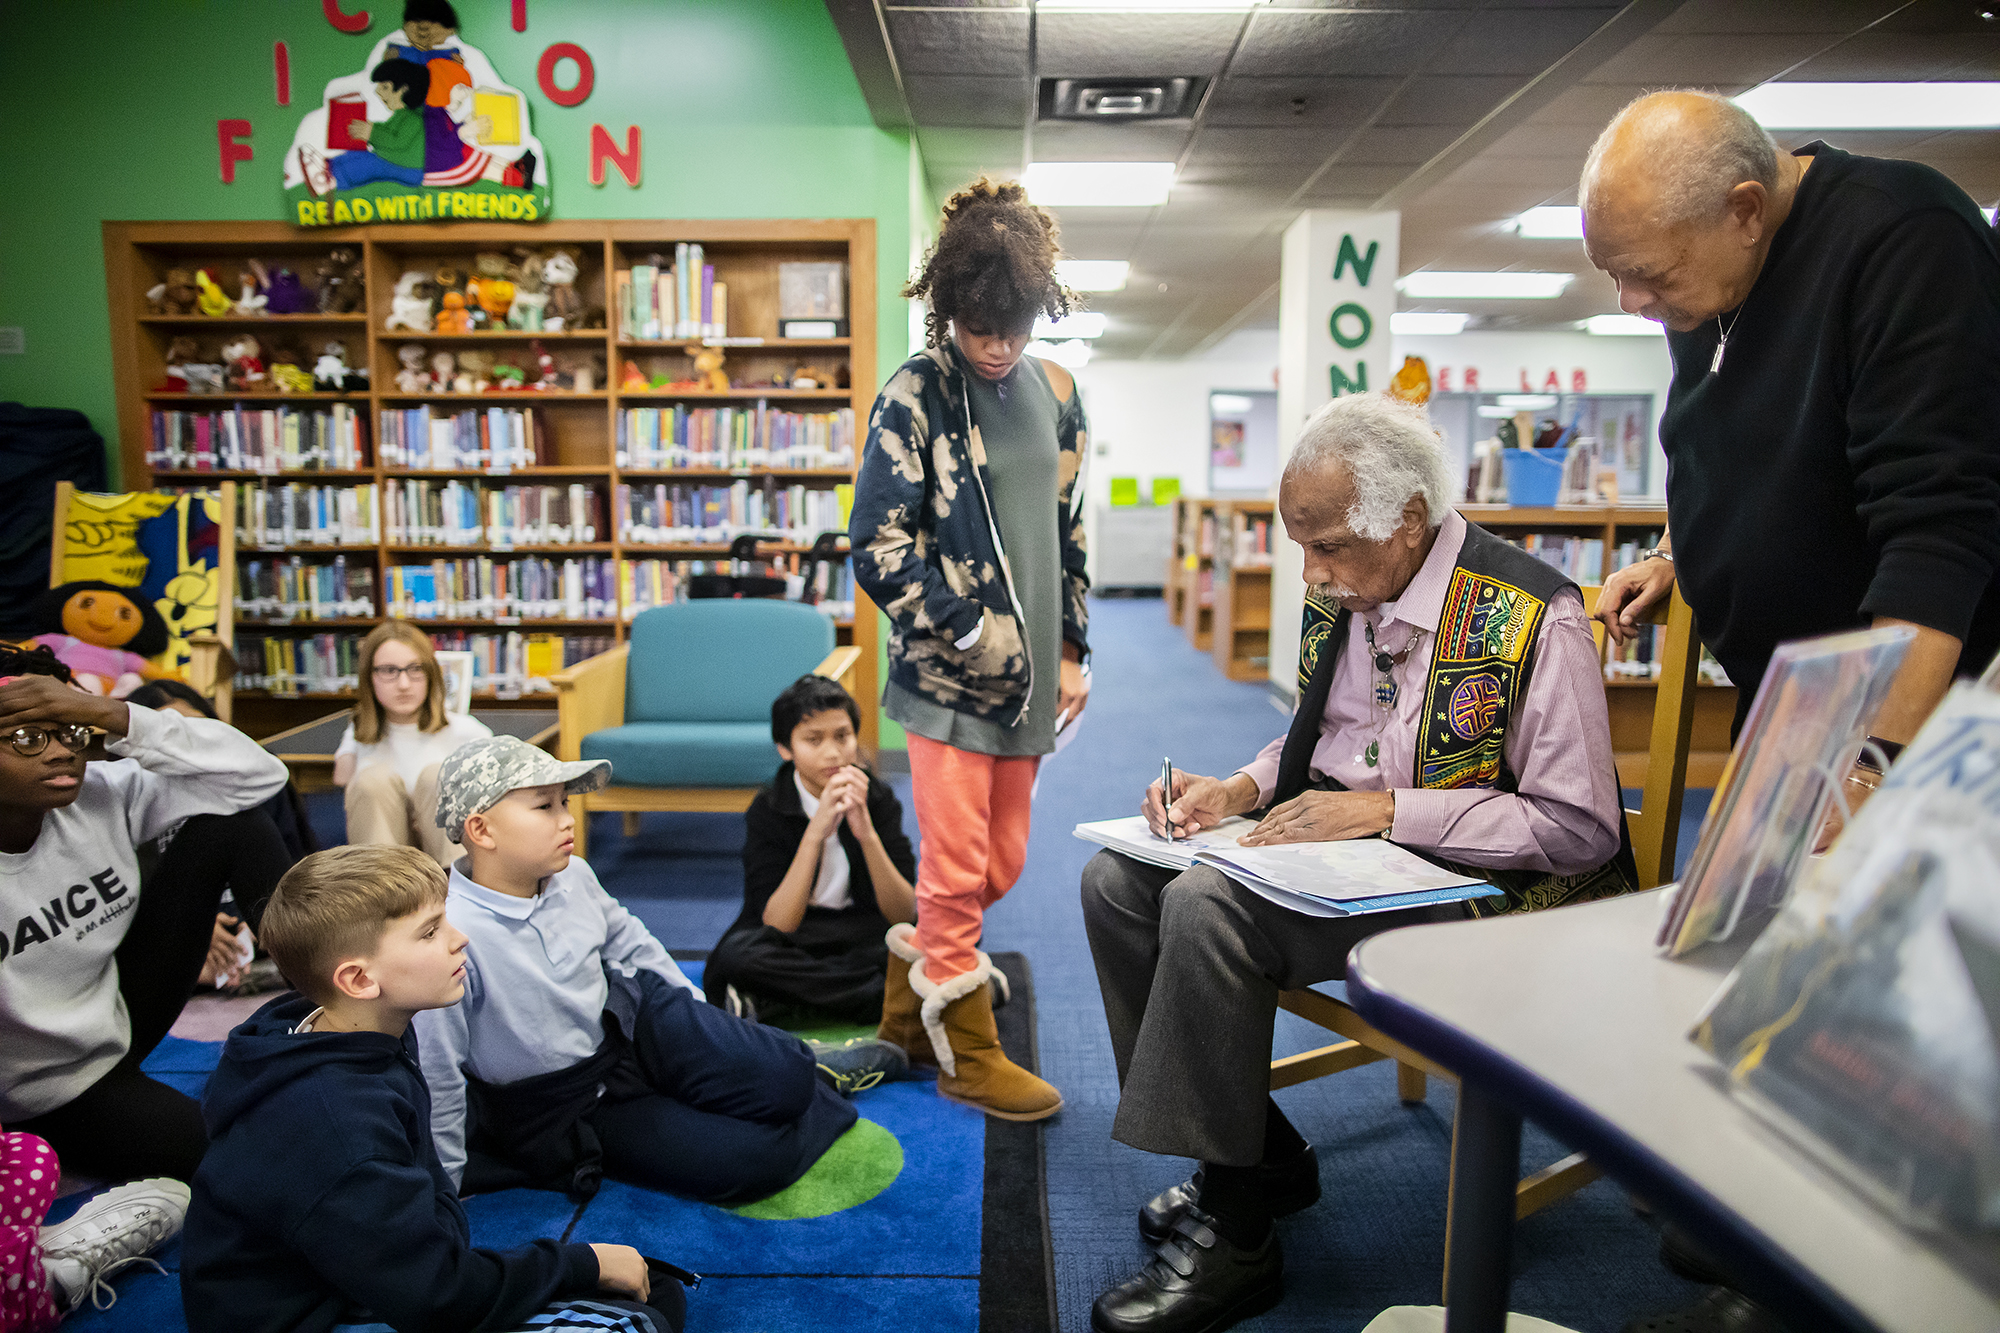 Ashley Bryan signs a copy of his book in the library at Penn Alexander School with students seated on the ground in front of him.